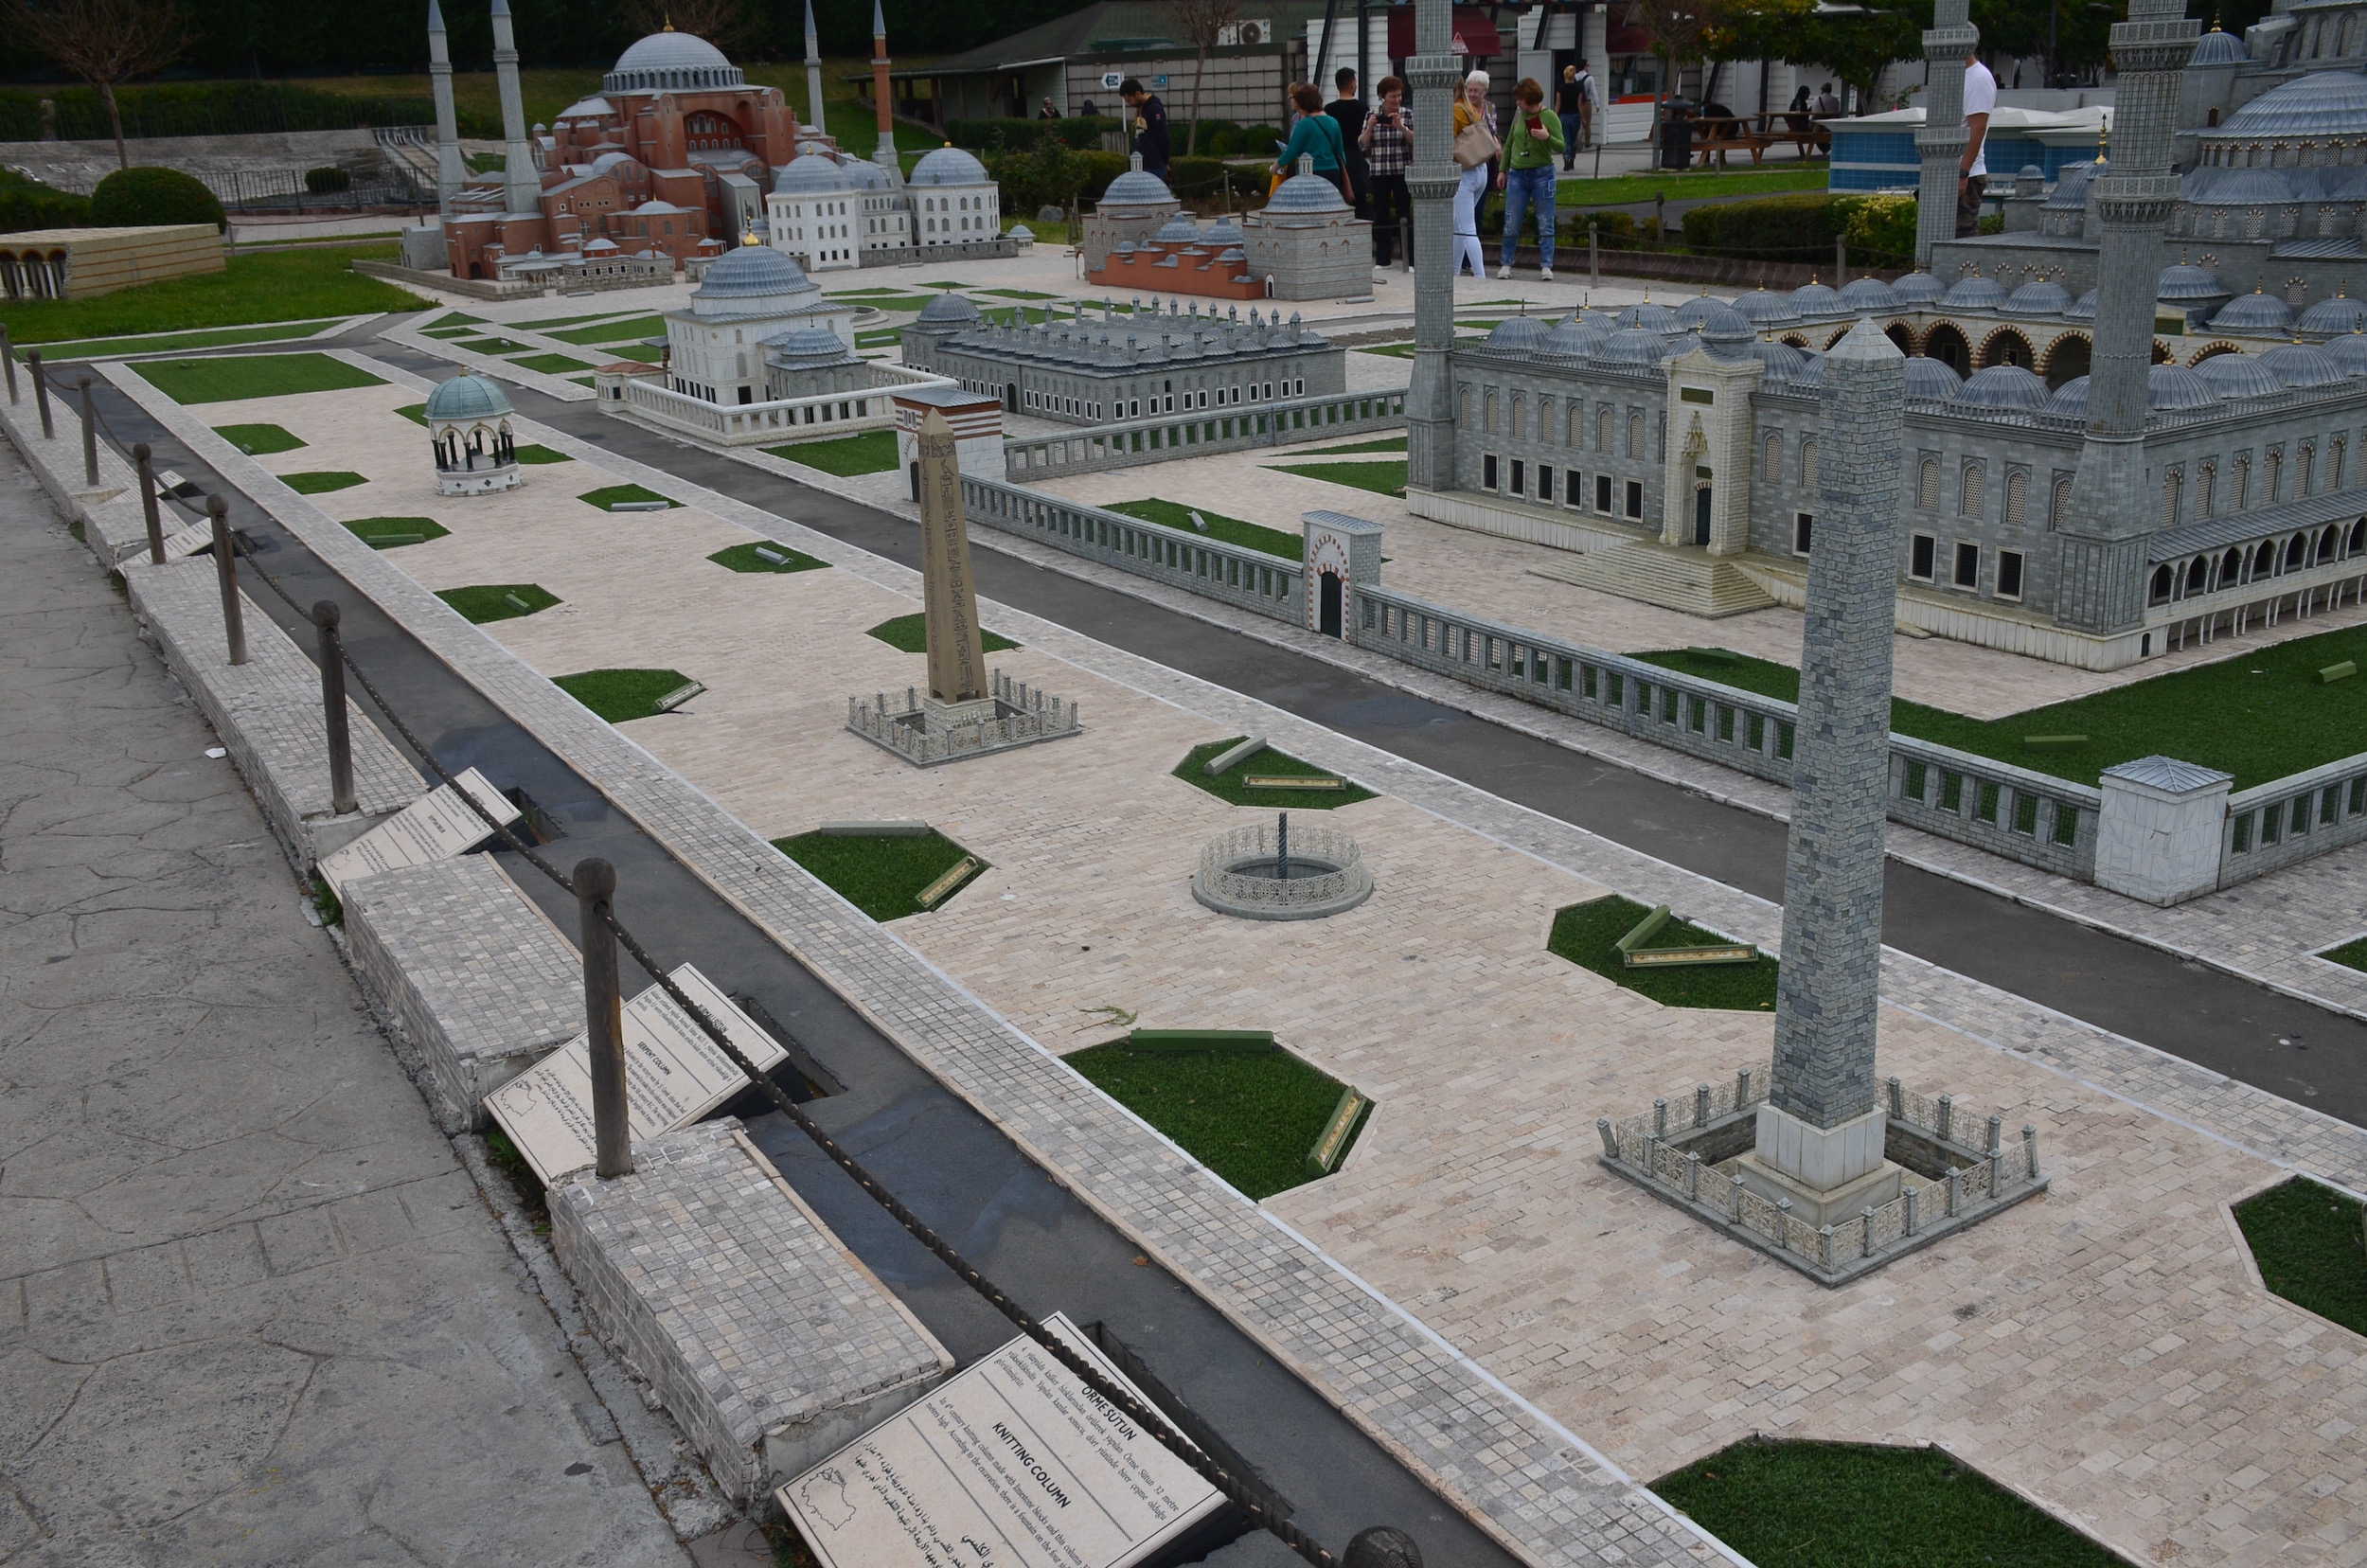 Model of the Hippodrome at Sultanahmet